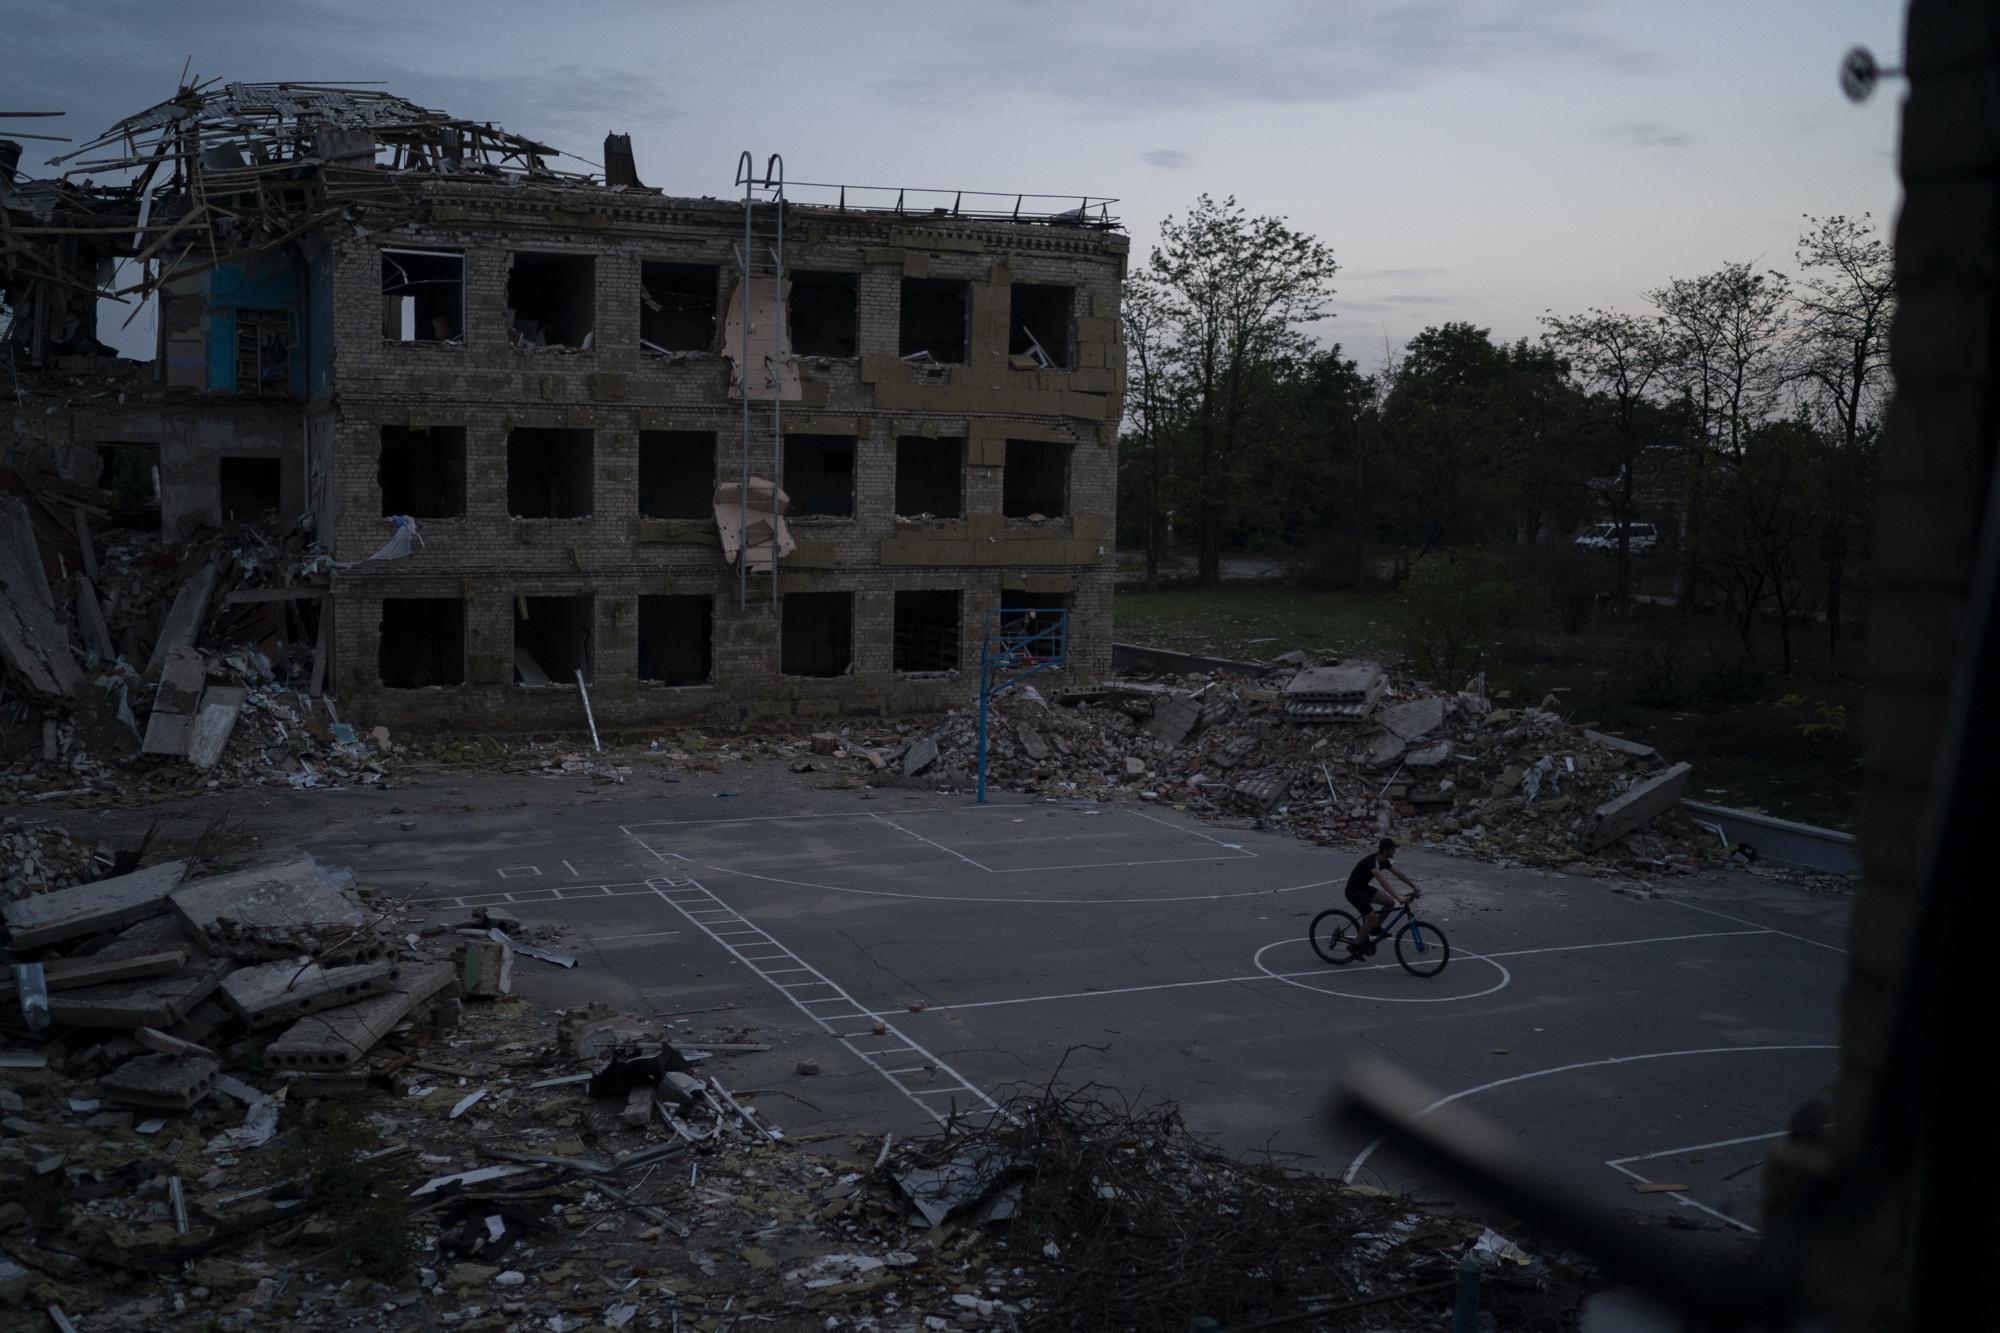 A man cycles through a courtyard of the destroyed School Number 23 after a Russian attack occurred in the second half of July, in Kramatorsk, Ukraine, Saturday, Aug. 27, 2022. (AP Photo/Leo Correa)